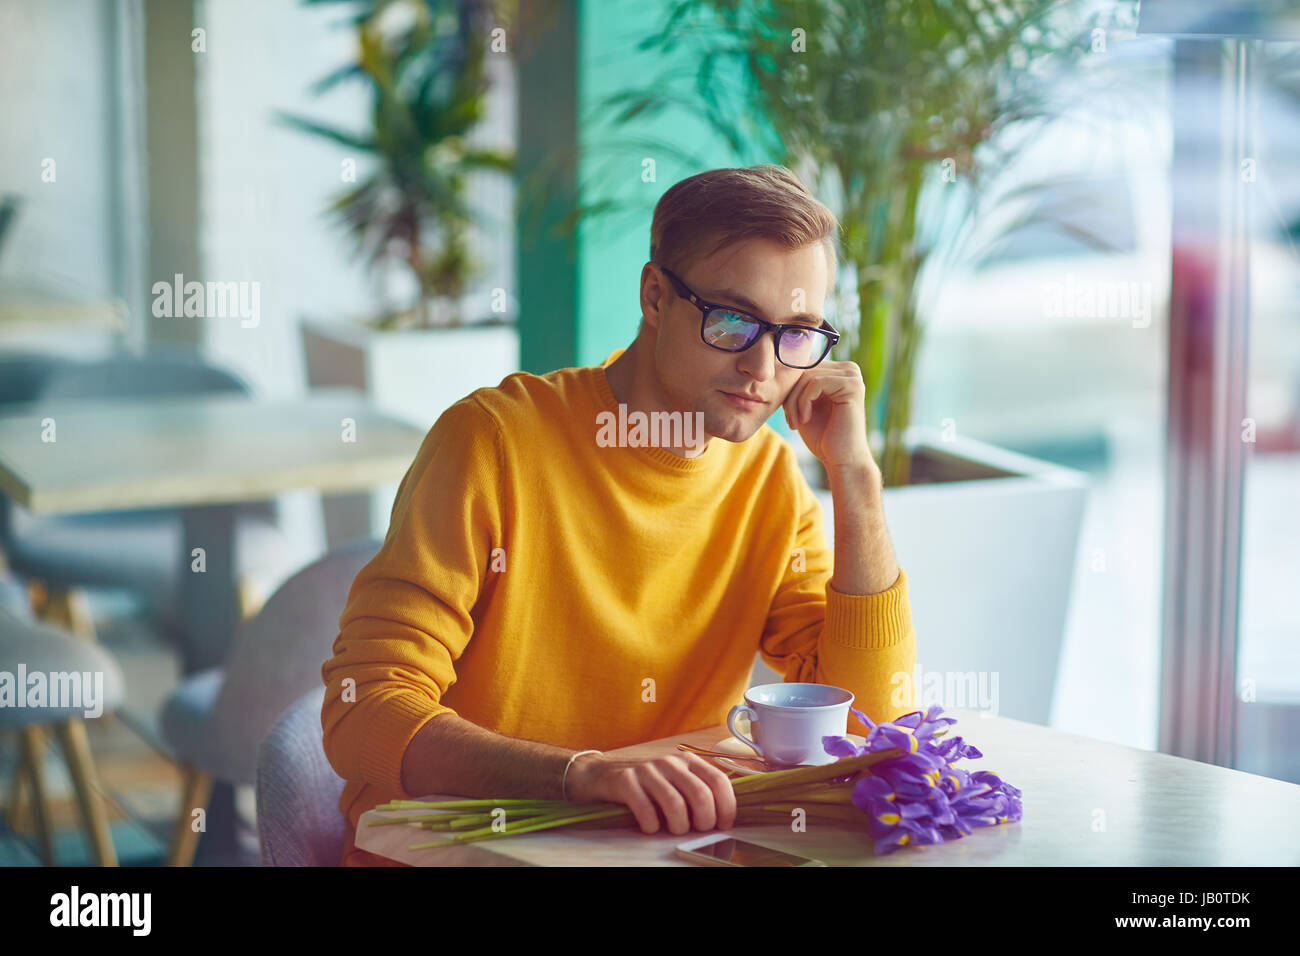 Bored Guy Waiting for Girlfriend in Cafe Stock Photo